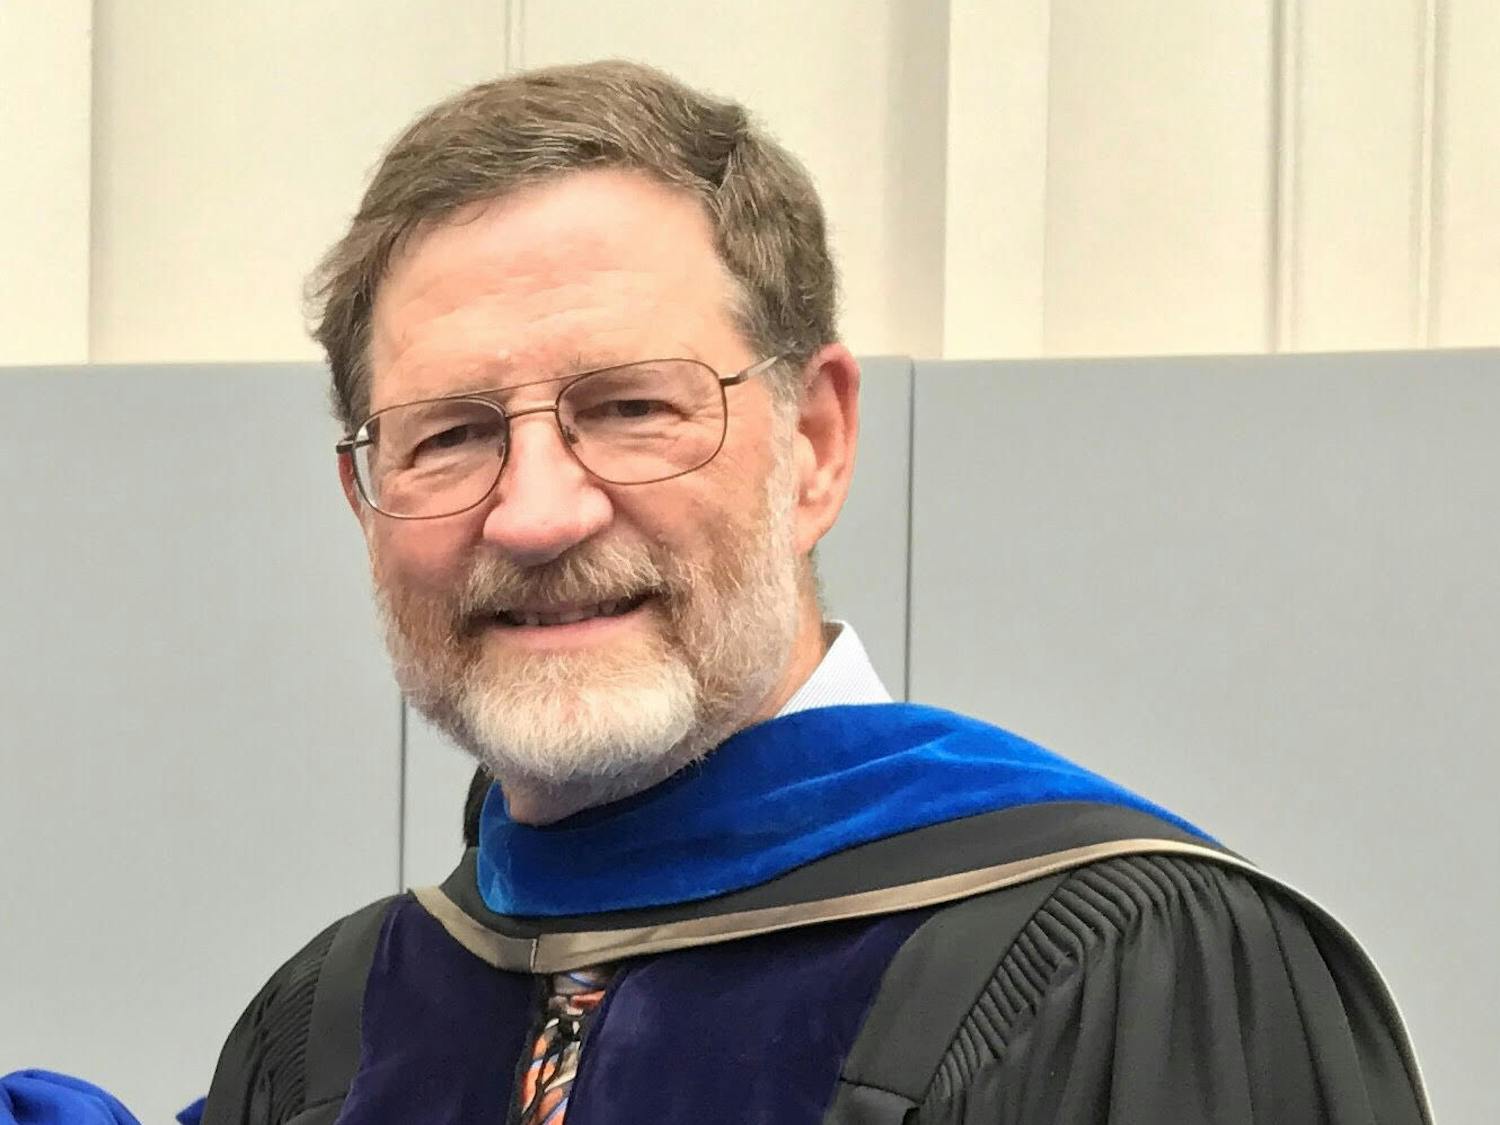 Richard Yost, 66, pictured in April 2019 at a PhD commencement ceremony where he escorted his most recent PhD graduate student.